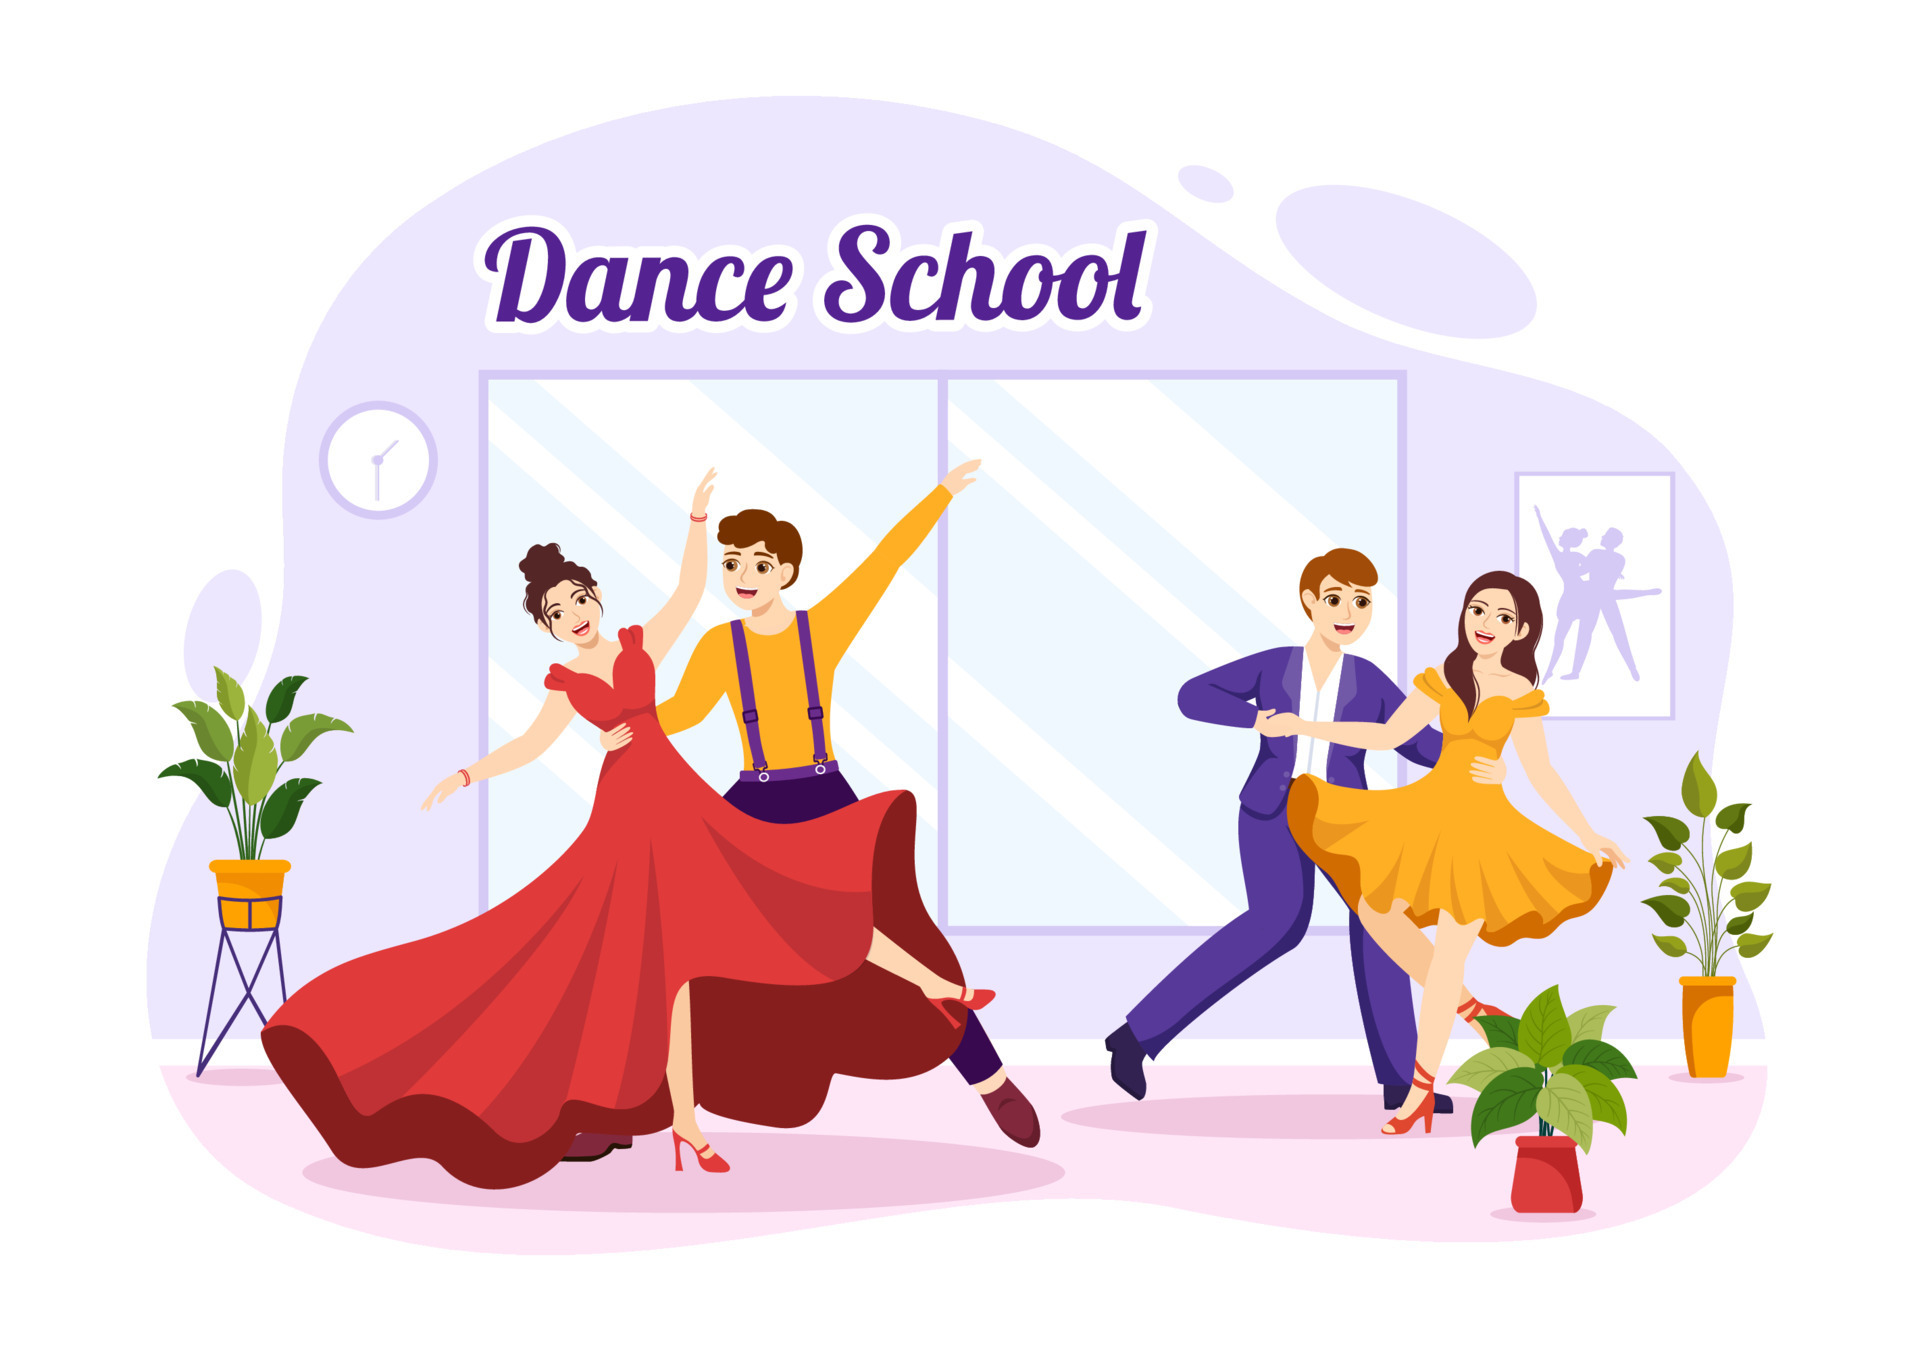 Dance School Illustration Of People Dancing Or Choreography With Music